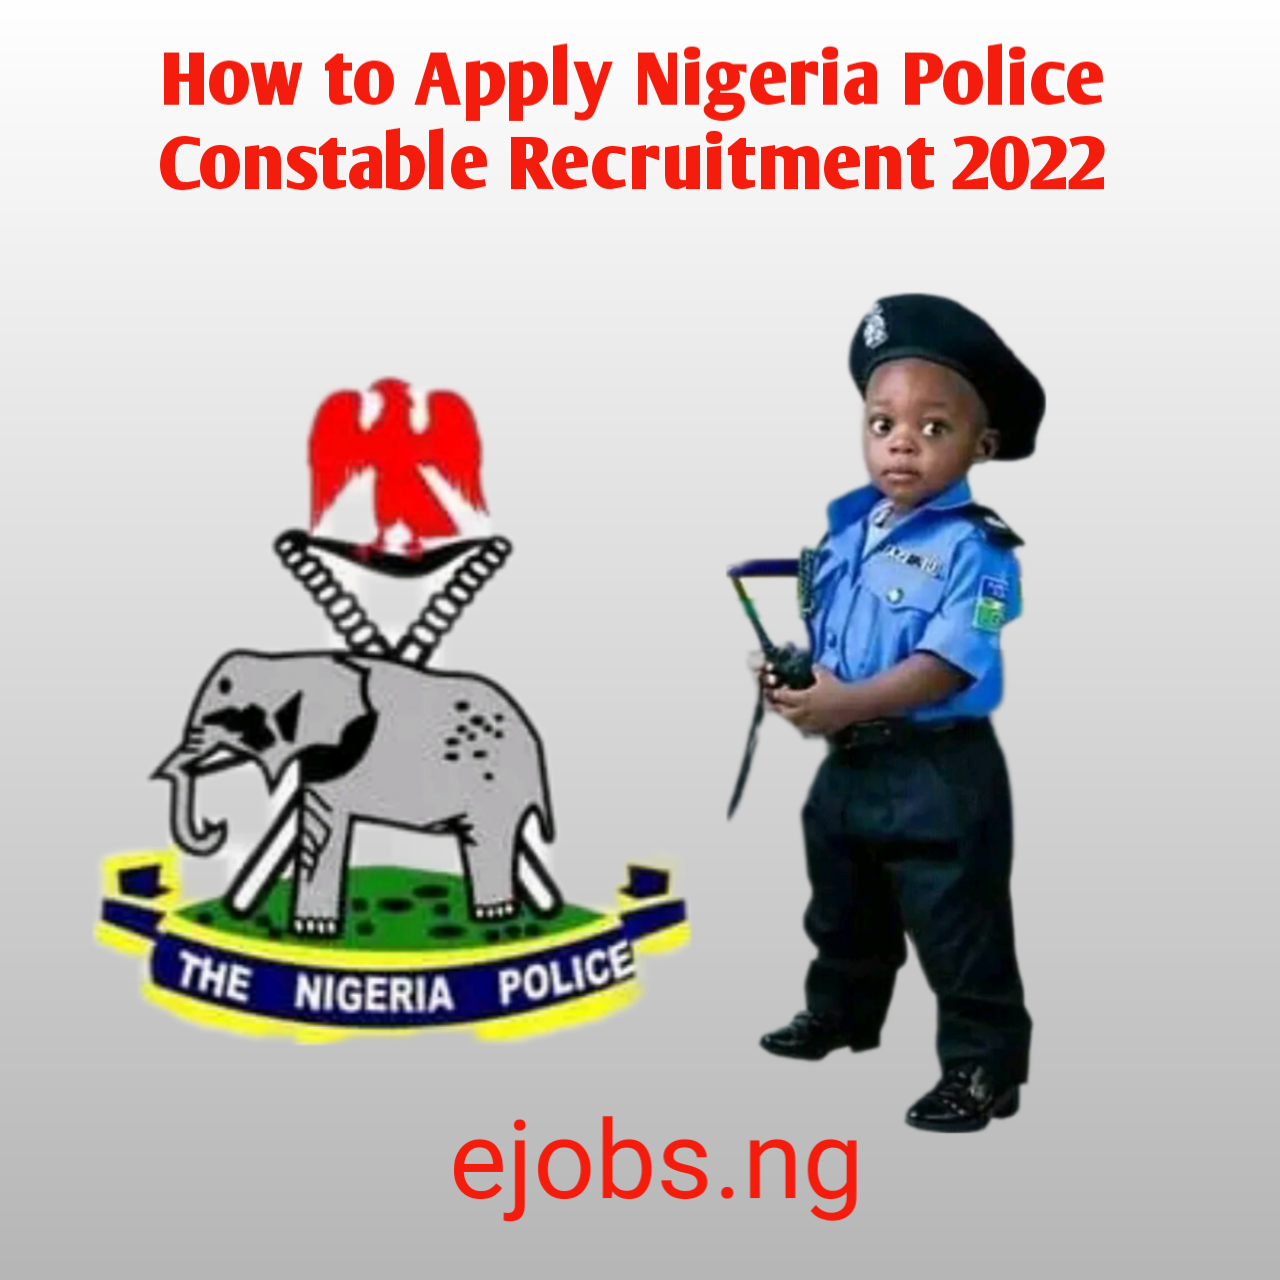 How to Apply Nigeria Police Constable Recruitment 2022